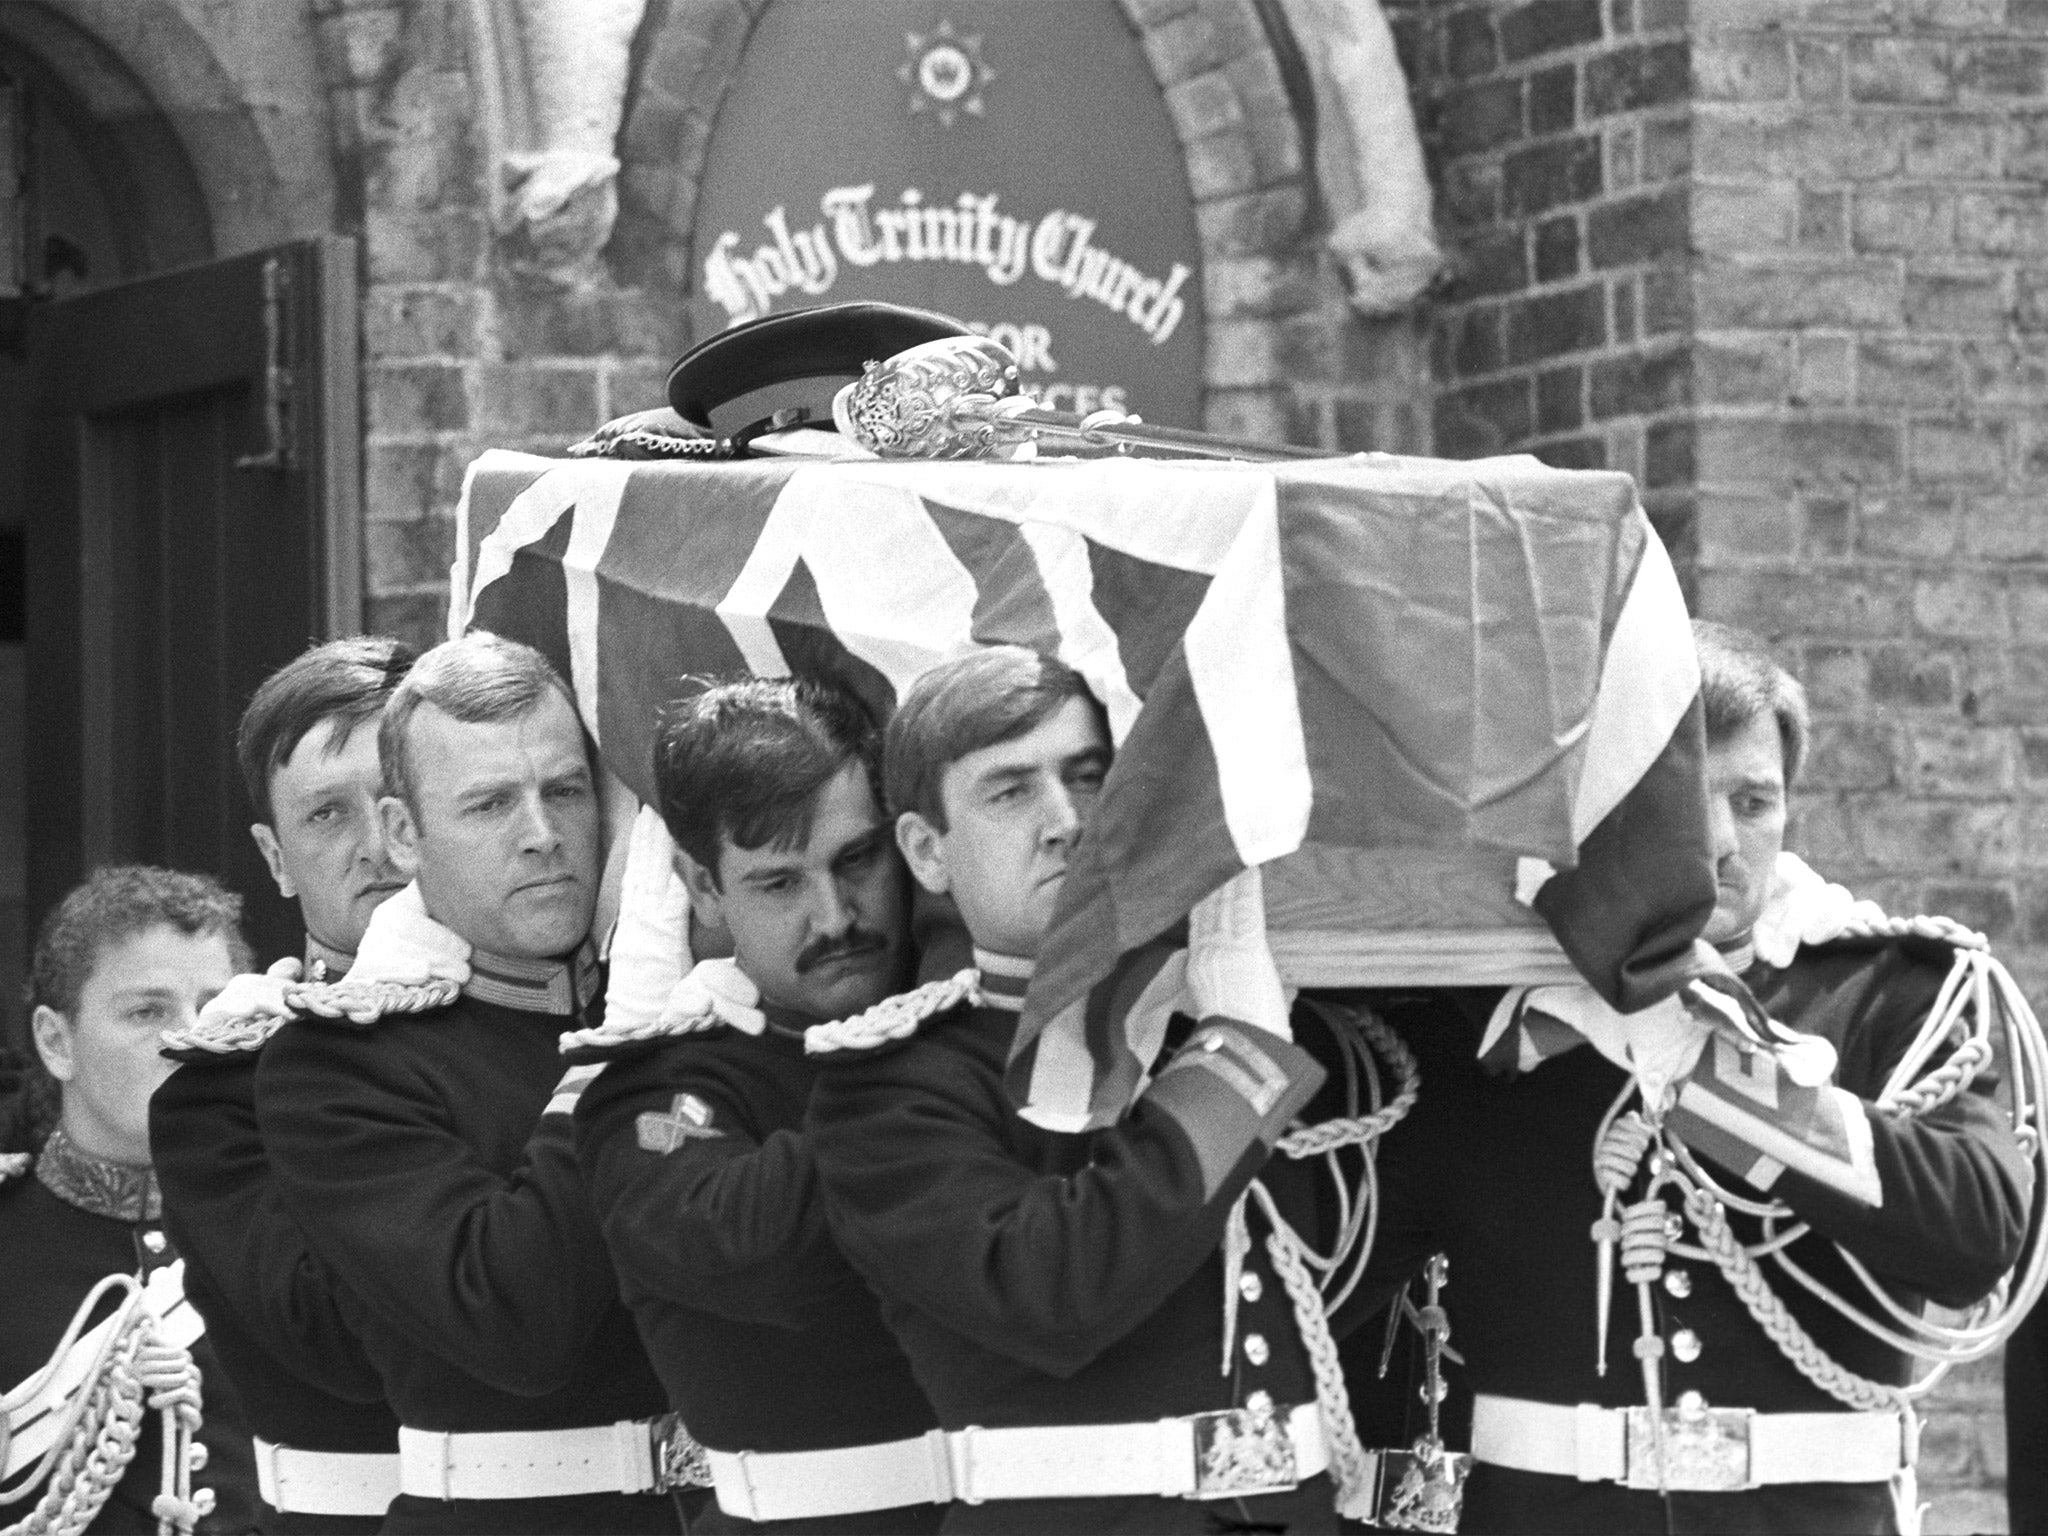 The flag-draped coffin carrying Lt Anthony Daly, the Blues and Royals officer killed in the Hyde Park bombing